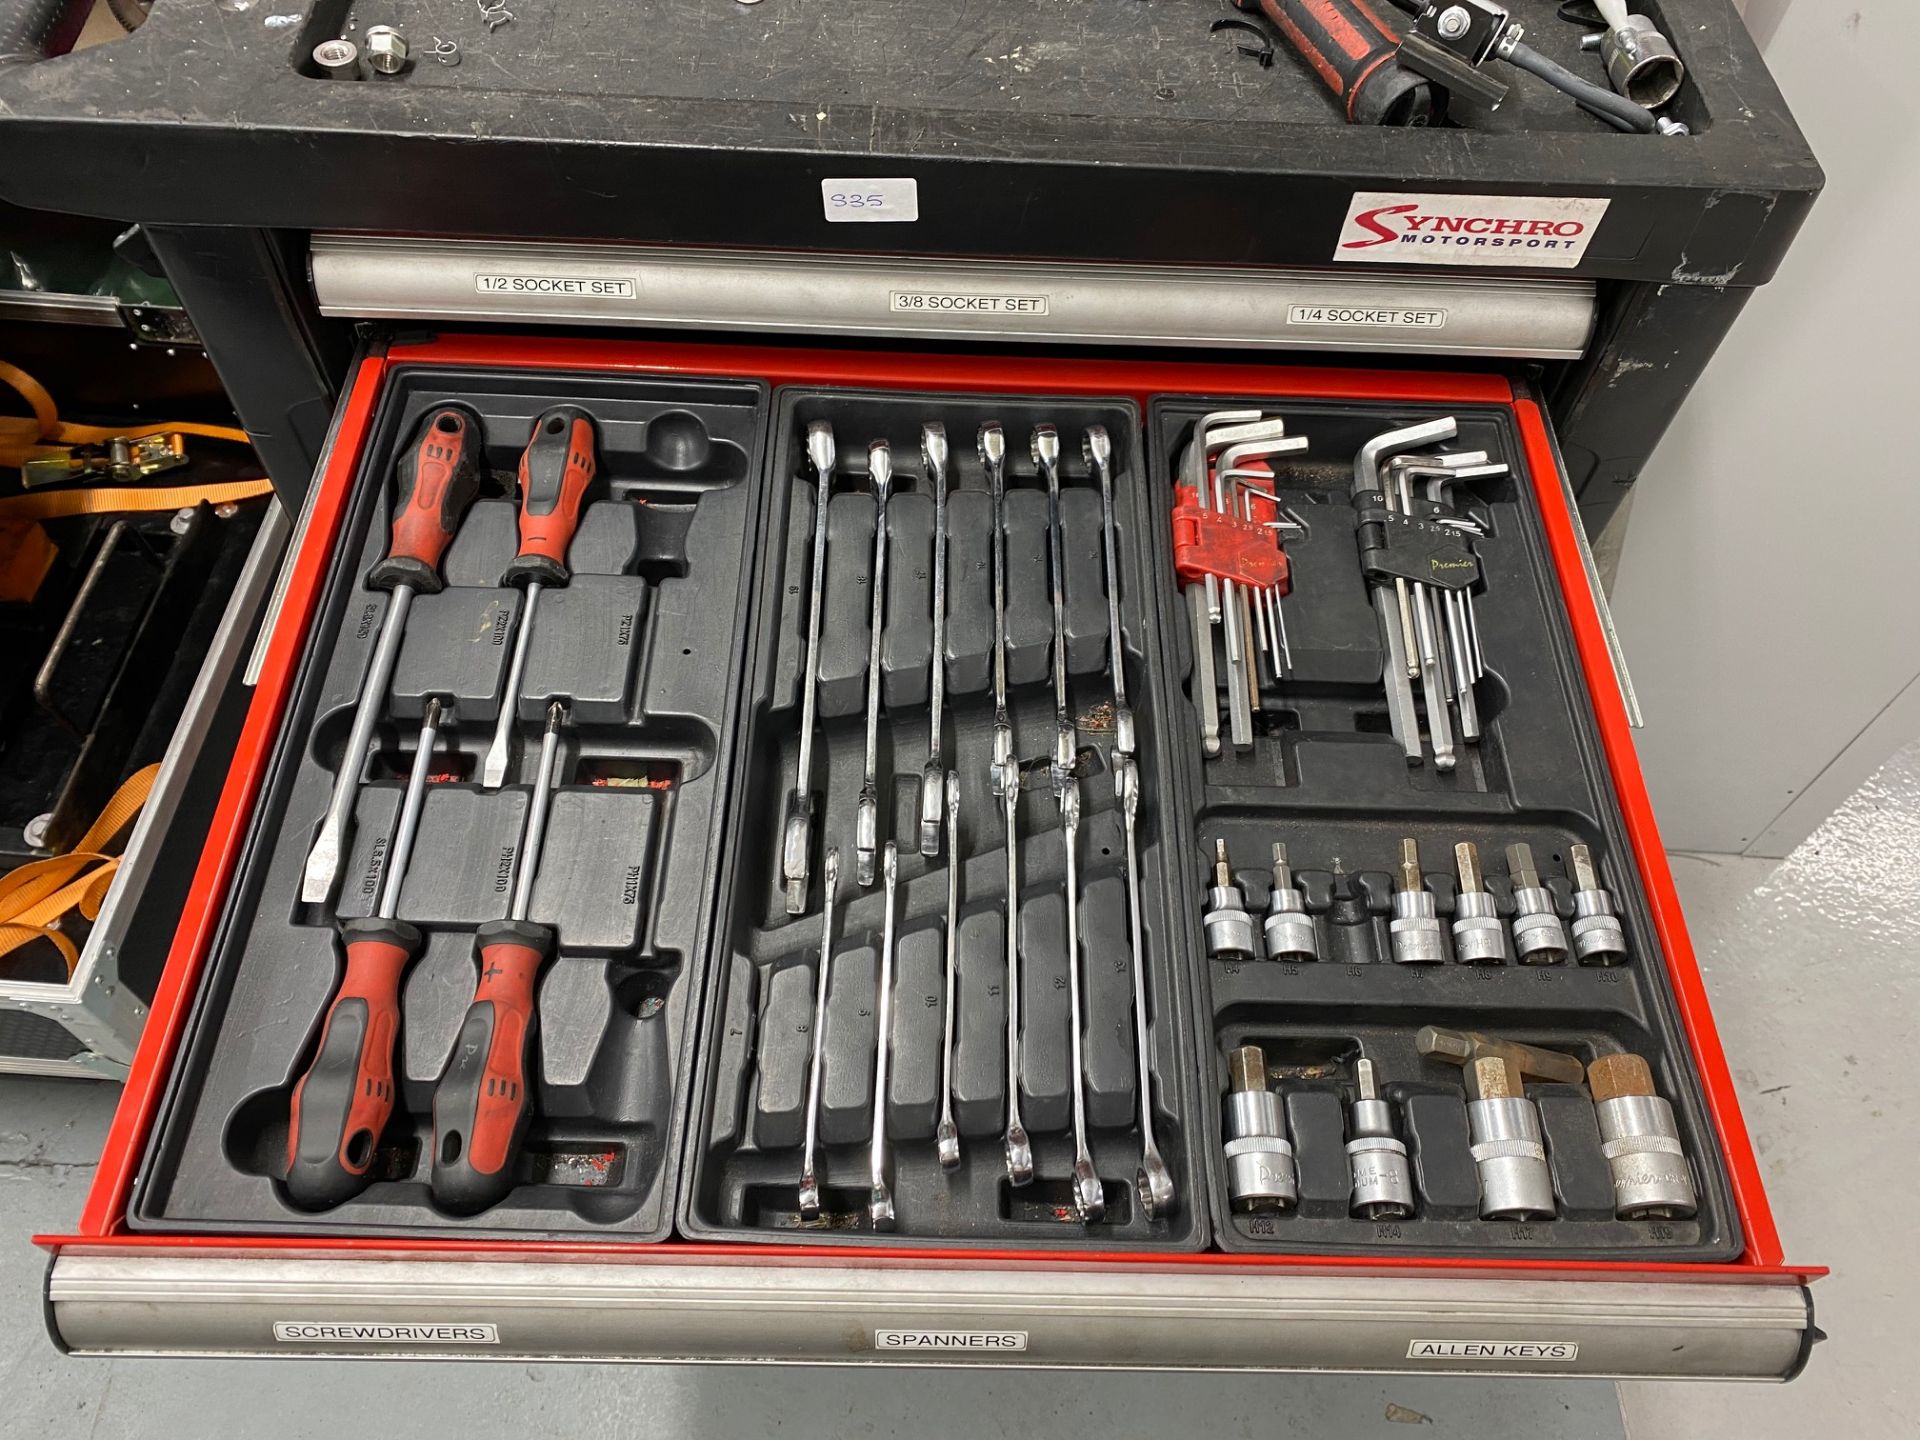 Sealey Premier 8 drawer mobile toolbox including the following tools, metric sockets 10-32mm, 1/ - Bild 3 aus 10